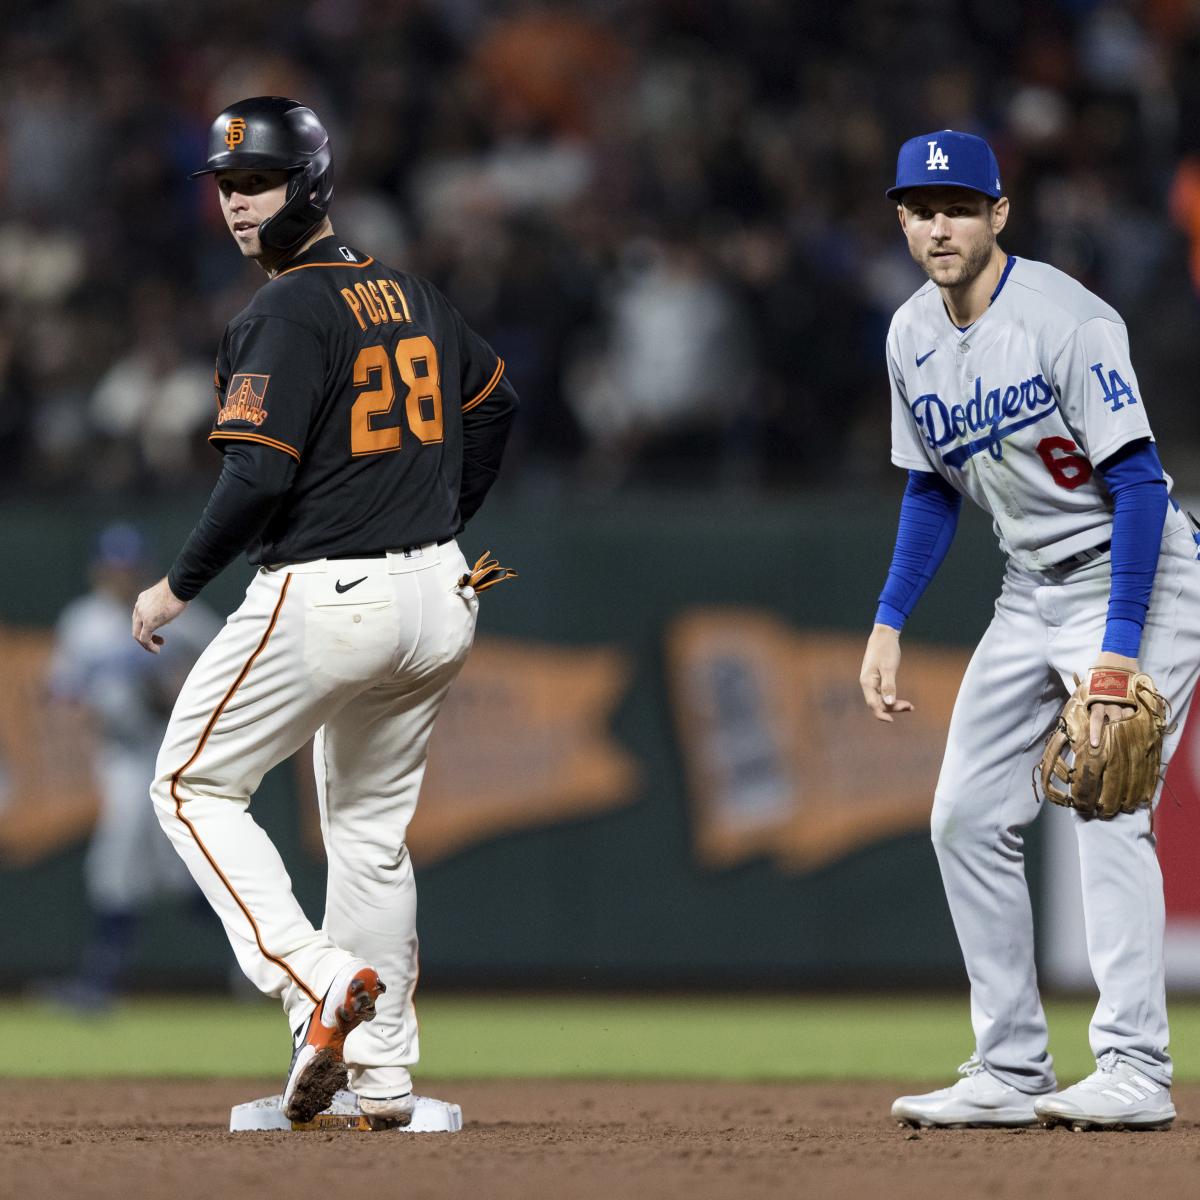 KNBR on X: THE GIANTS ARE THE 2021 NL WEST CHAMPIONS 😤😤😤 https